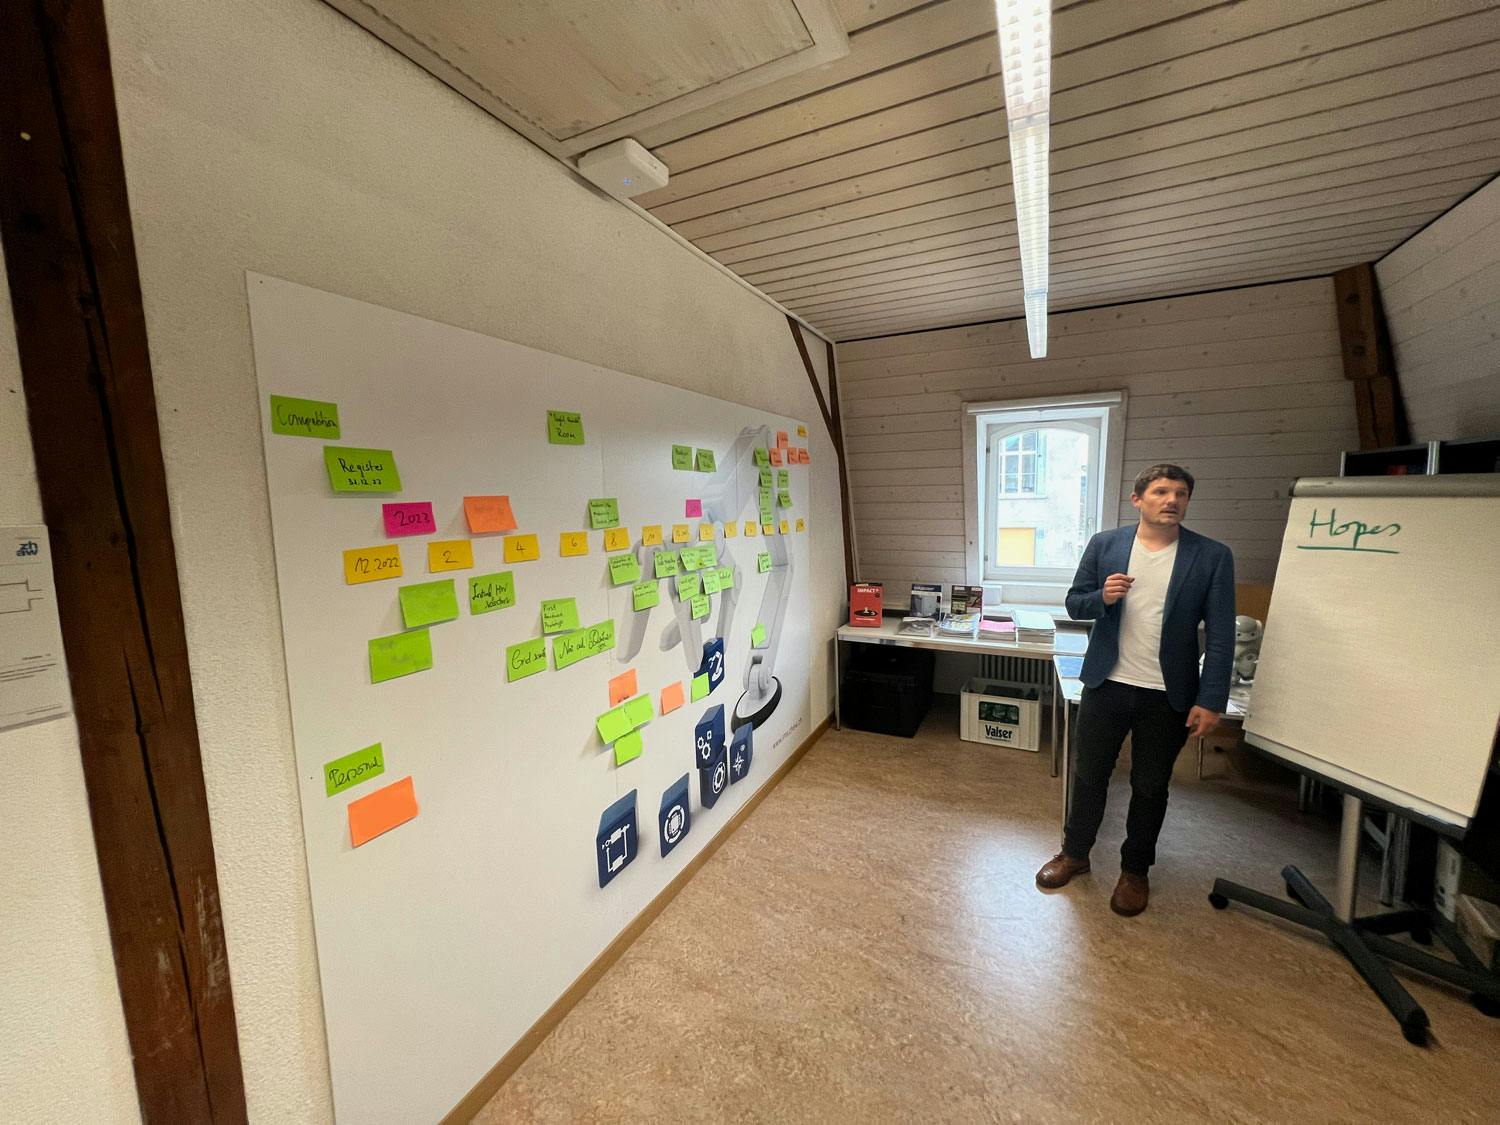 Prof Alexander Schmid stands in front of a wall covered with colorful Post-It notes, each representing a crucial date or event in the Sight Guide Team's timeline. He is passionately explaining the significance of the timeline to the team members, who are attentively listening and actively engaged in the discussion.